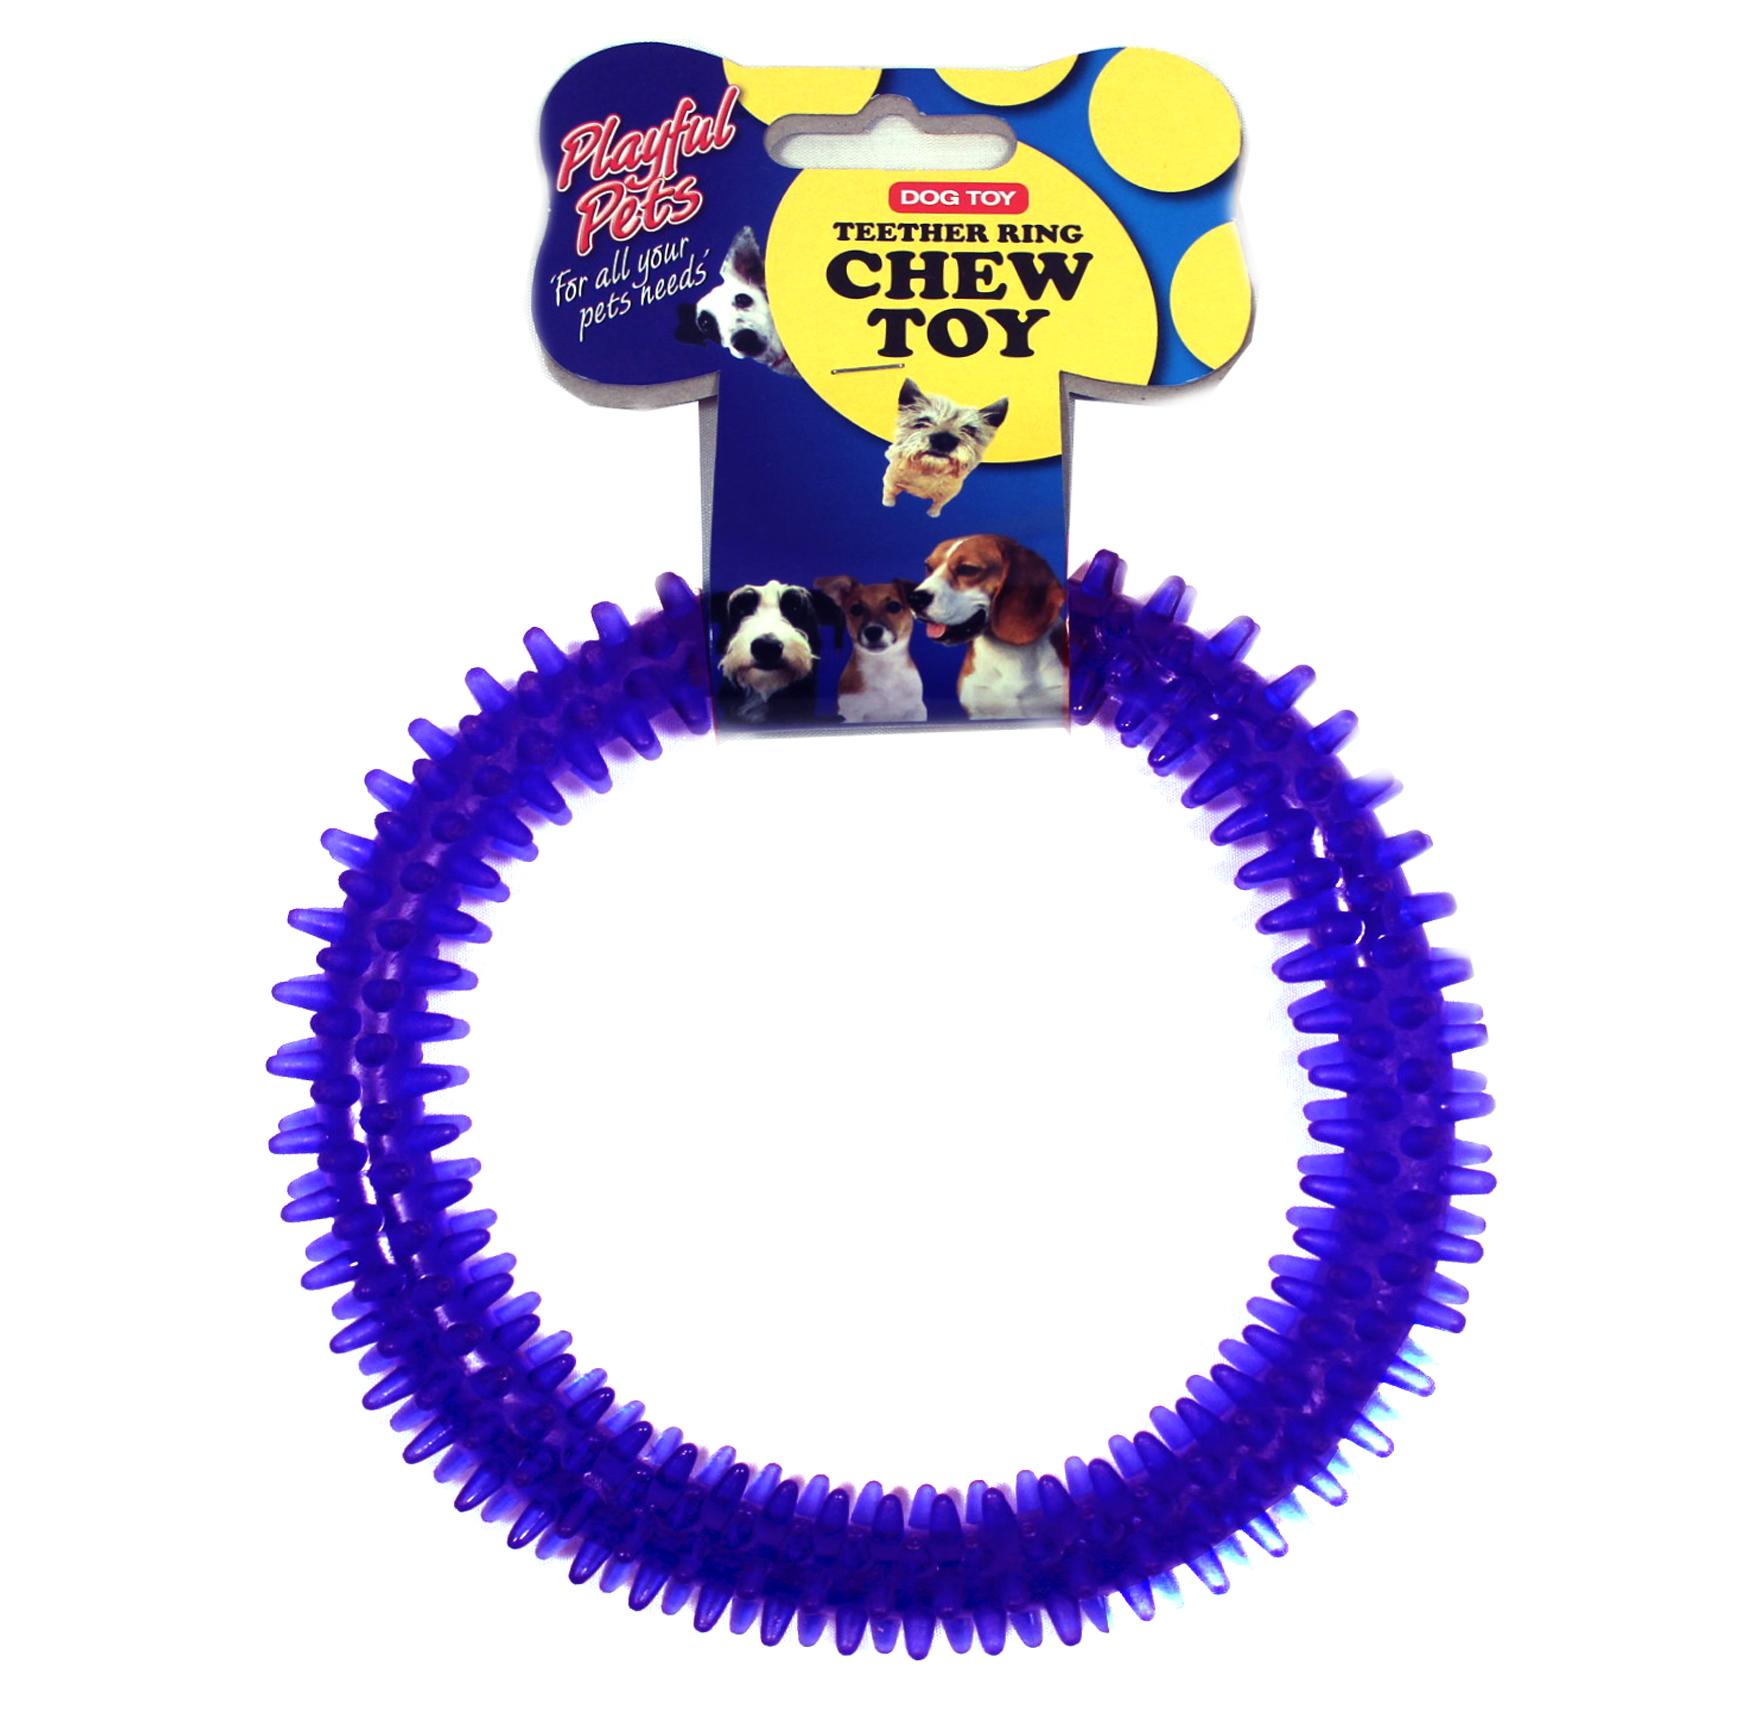 blue Dog chew toy with label